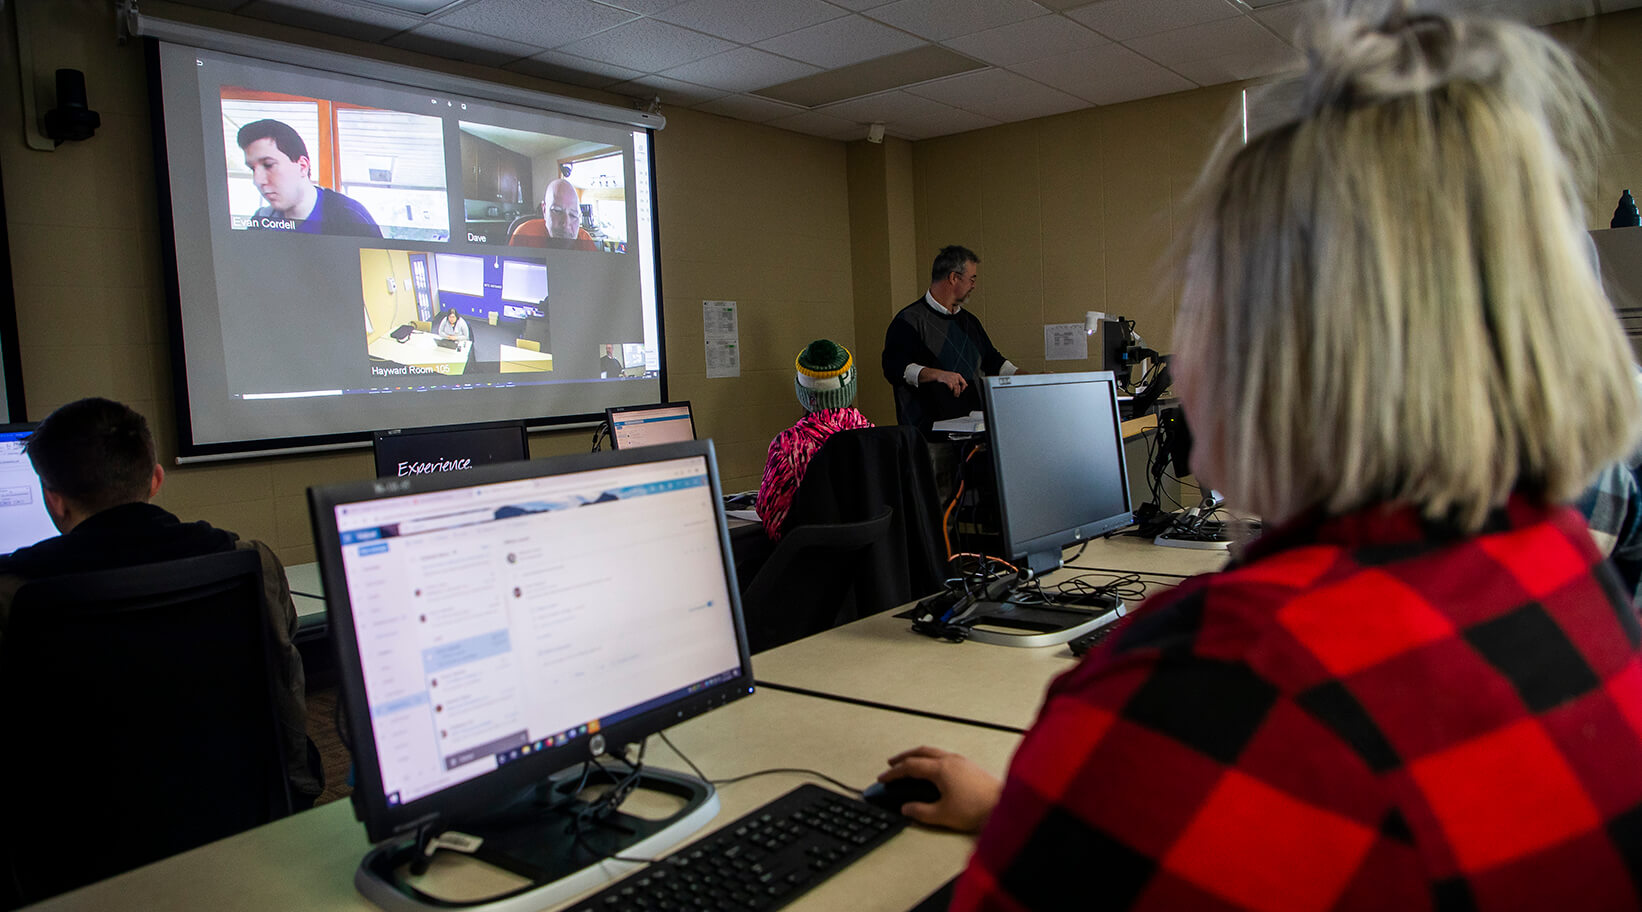 Students attending class both in person and joining remotely